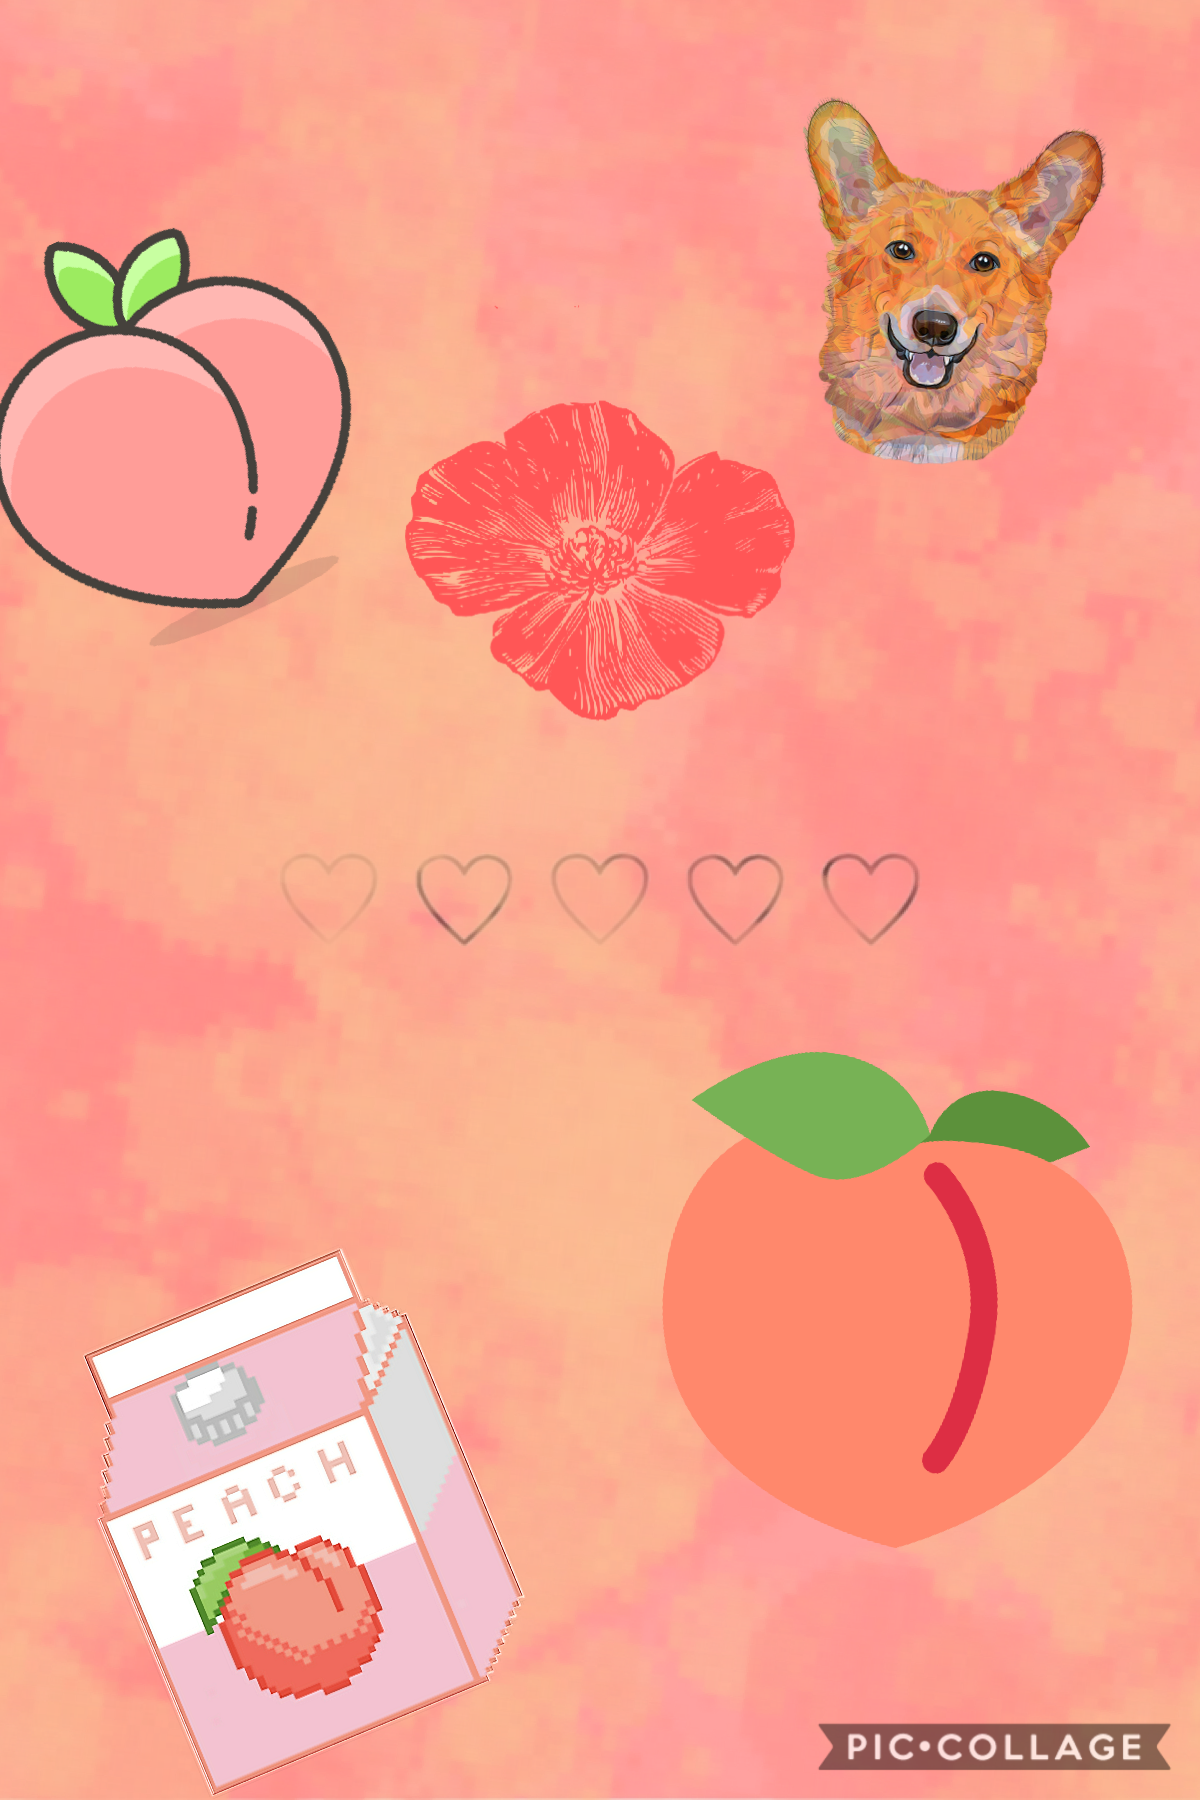 Thank you so much @-peachy-dreams- for the peach suggestion! I love the way this turned out ! 